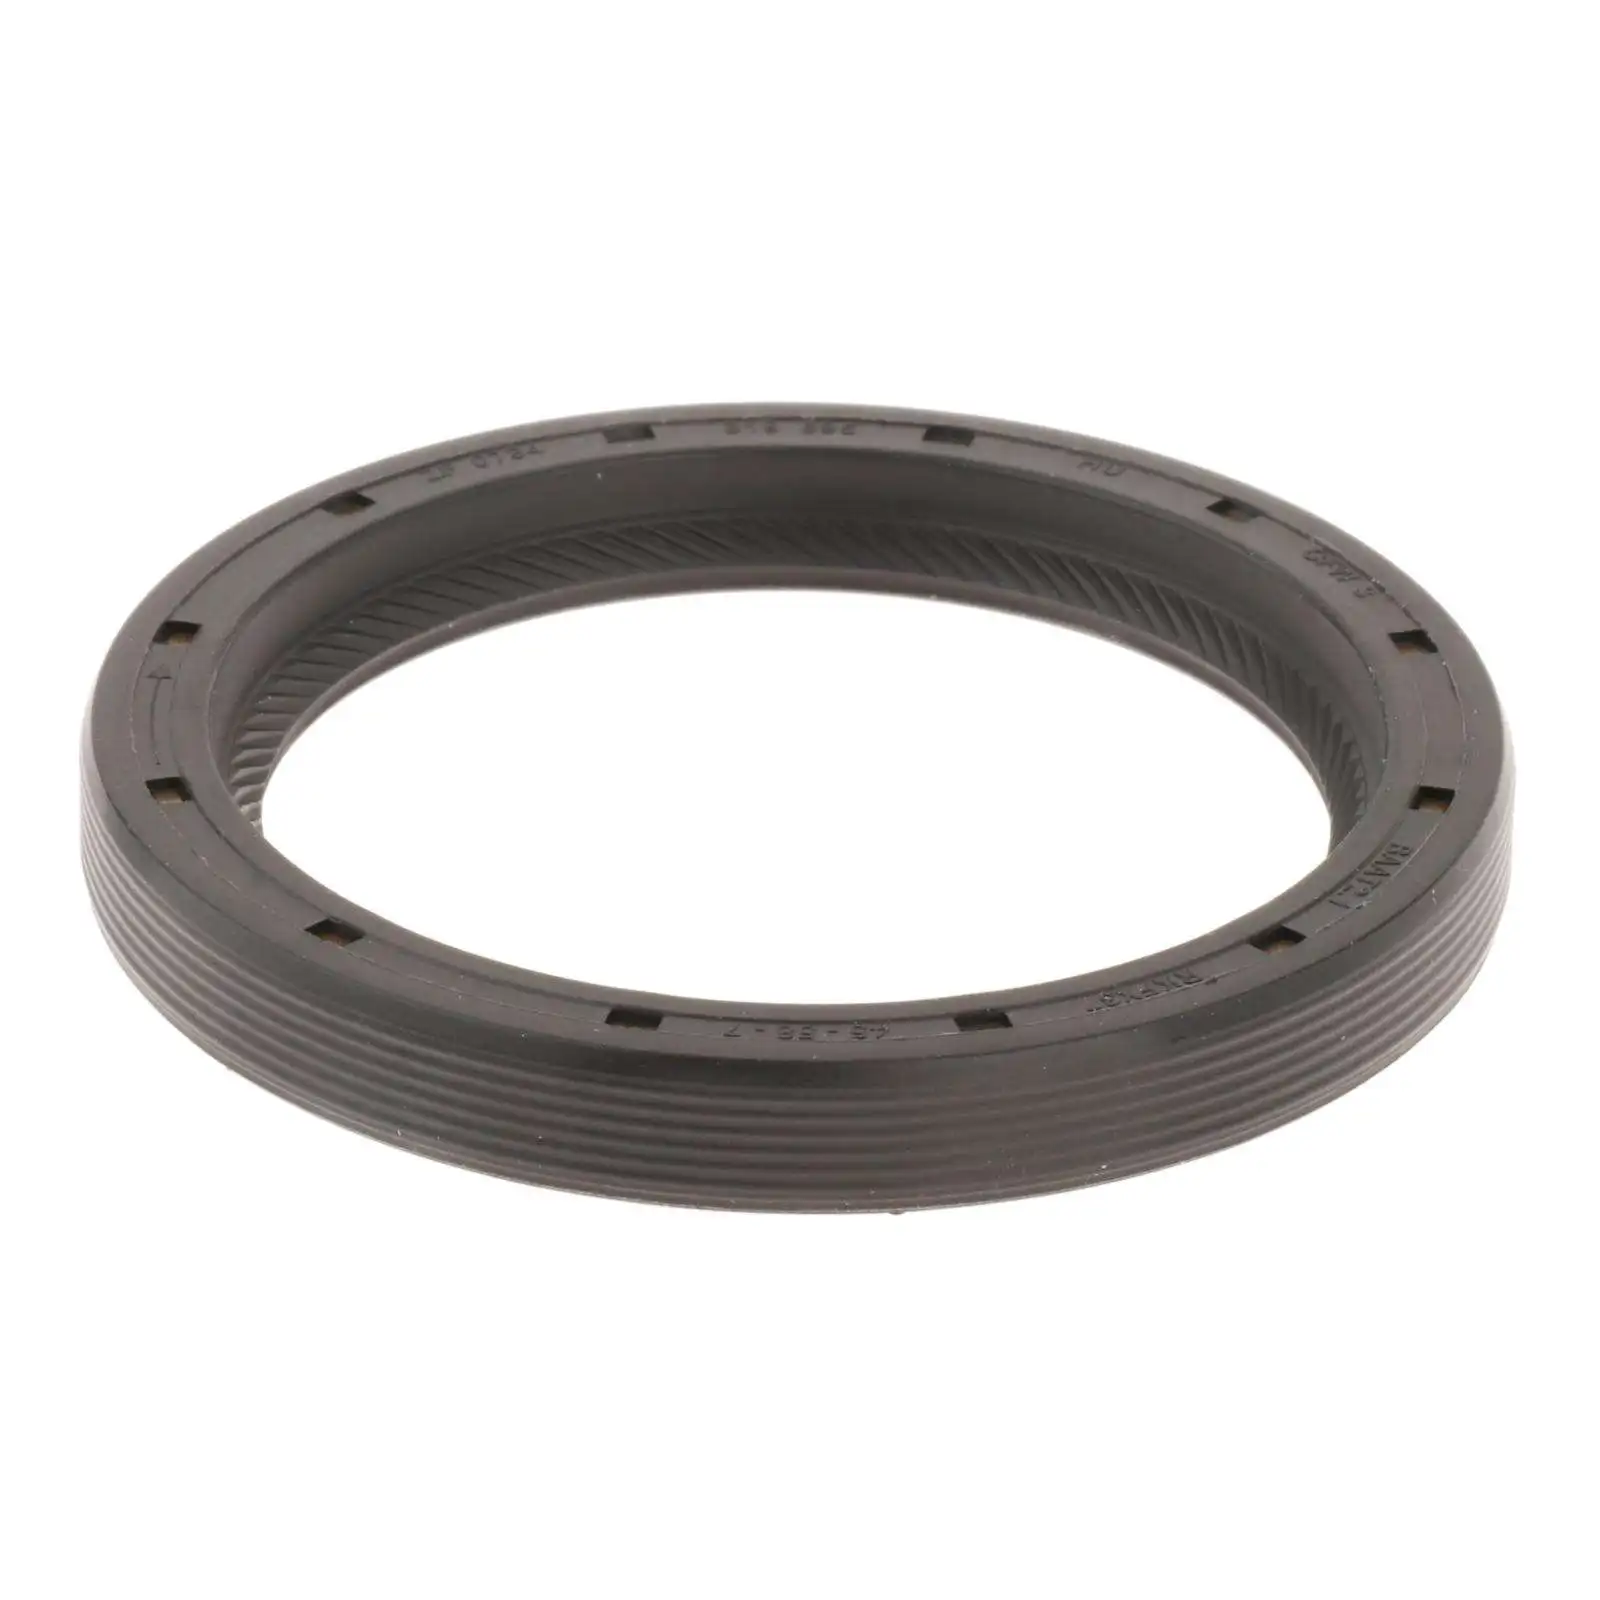 6HP19 6HP26 Transmission Oil Seal fits for , Durable Premium Material